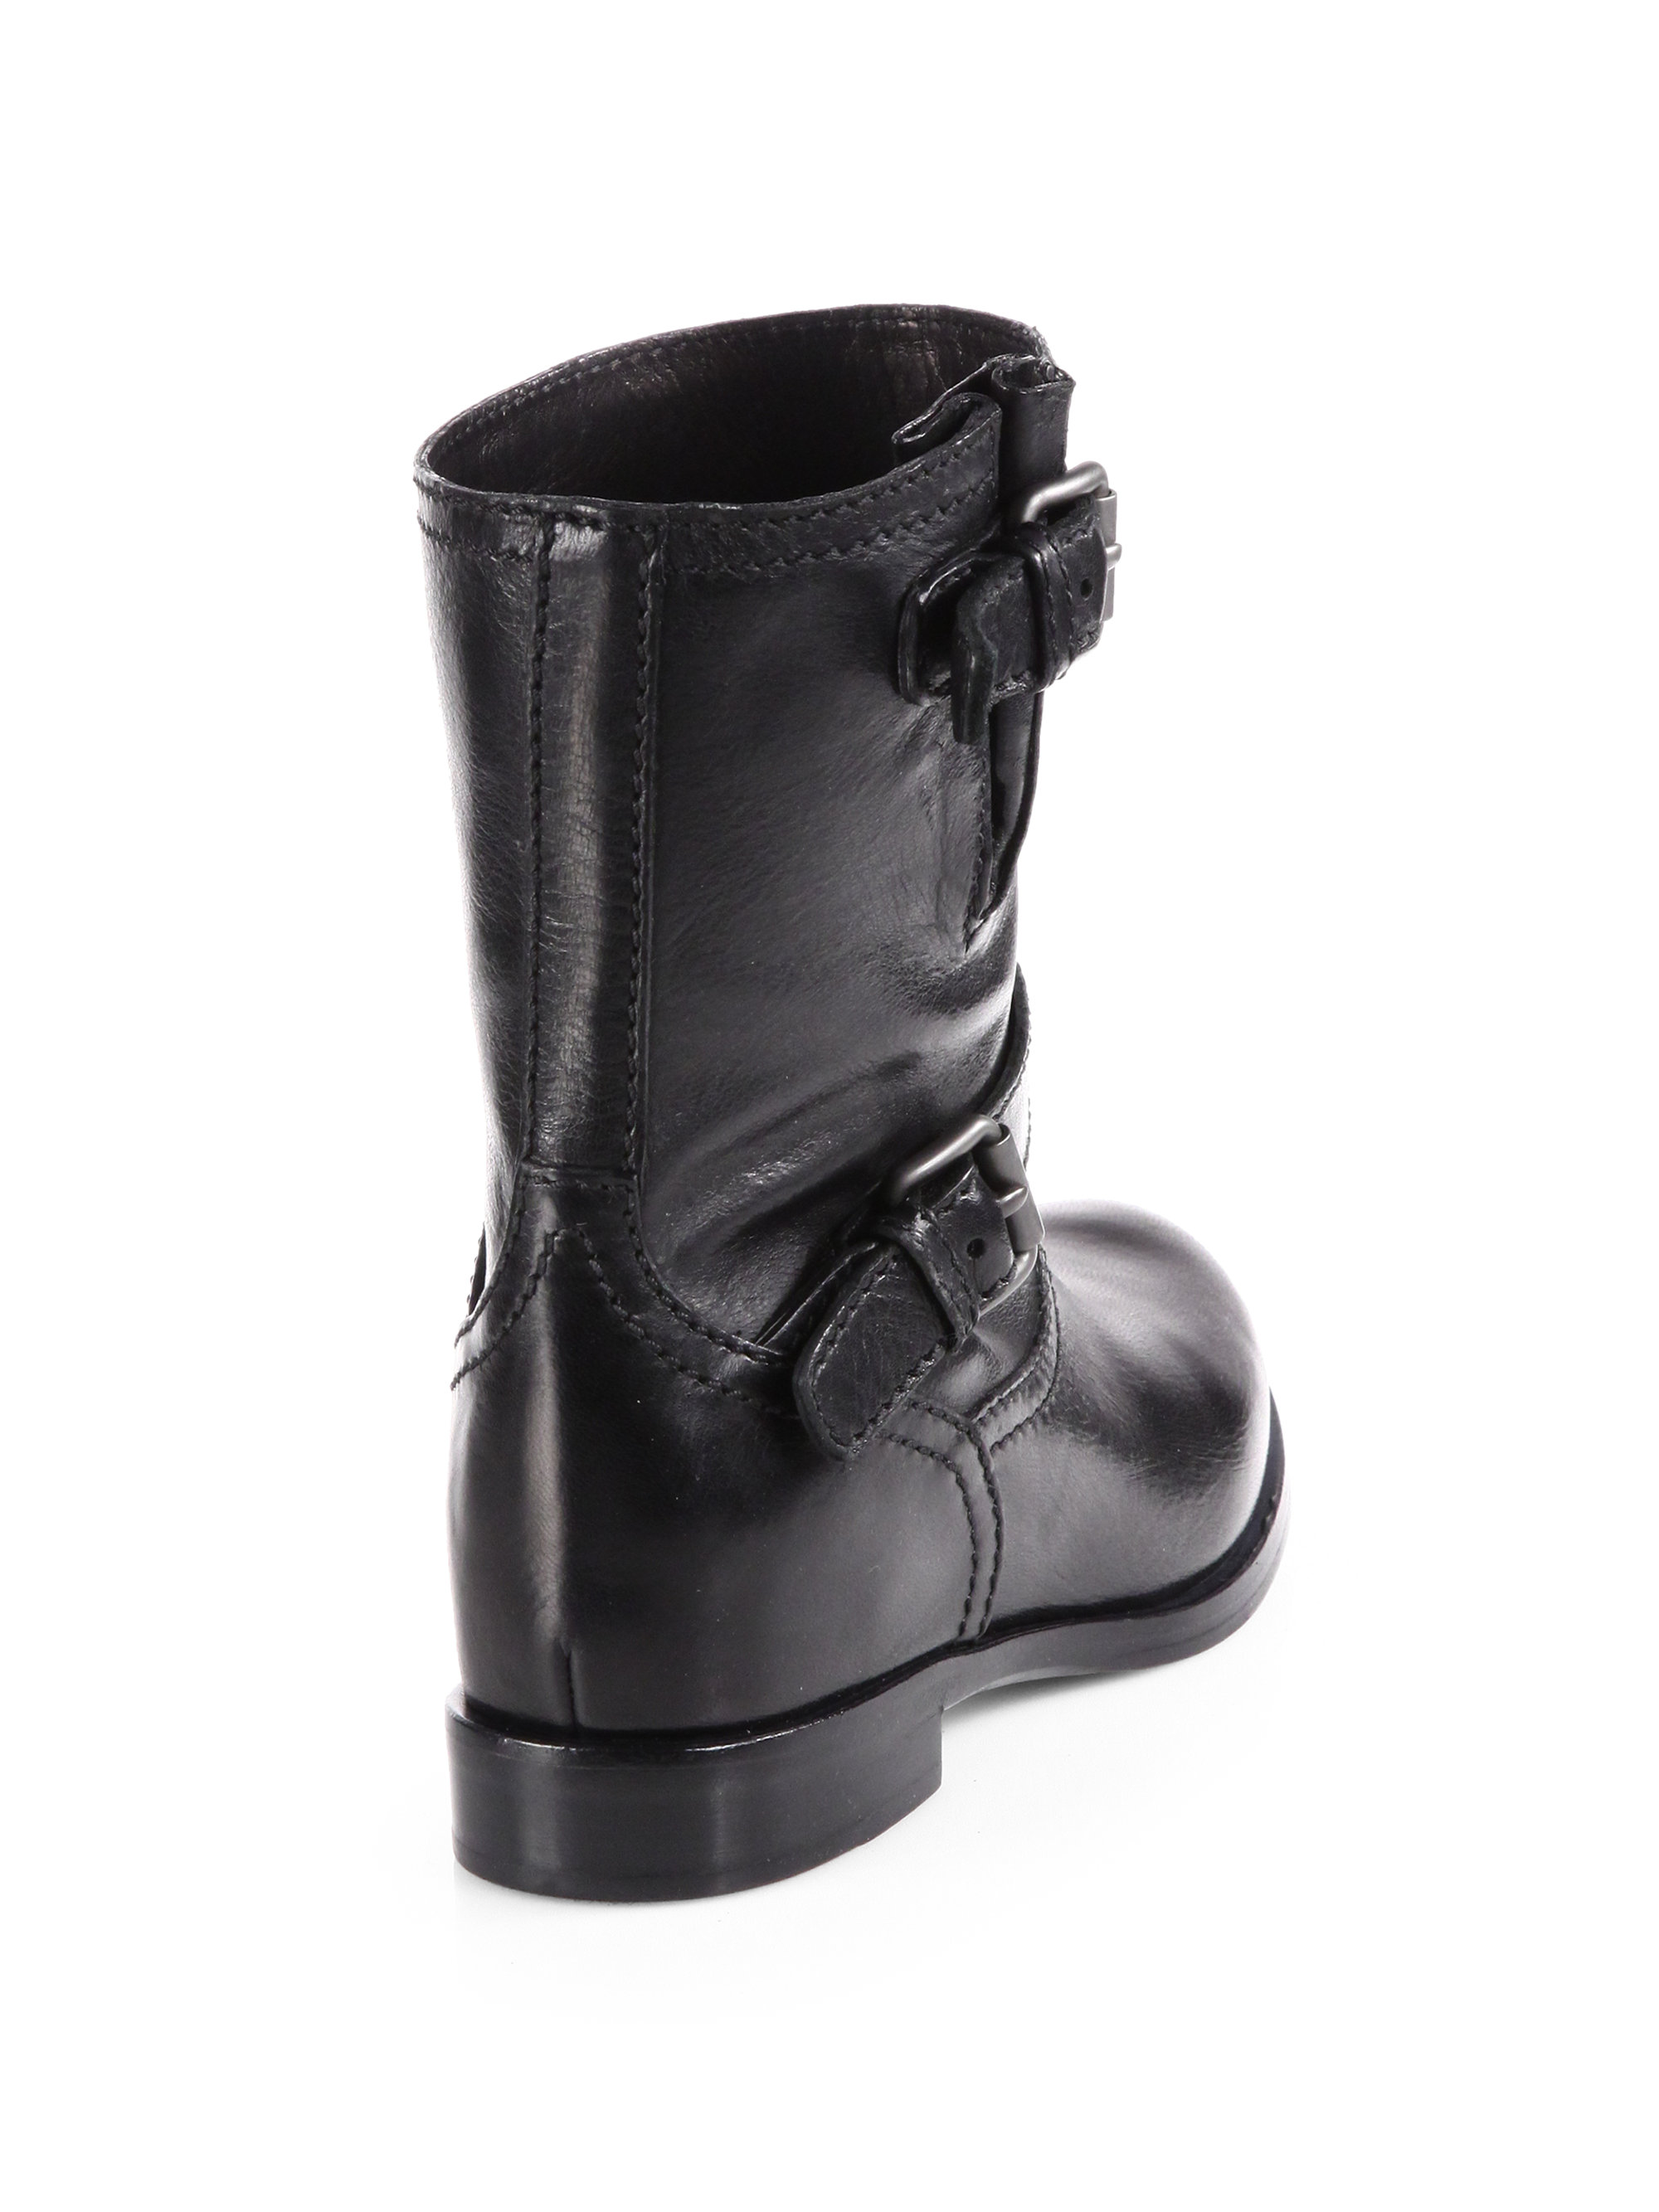 Prada Leather Double Buckle Motorcycle Boots in NeroBlack